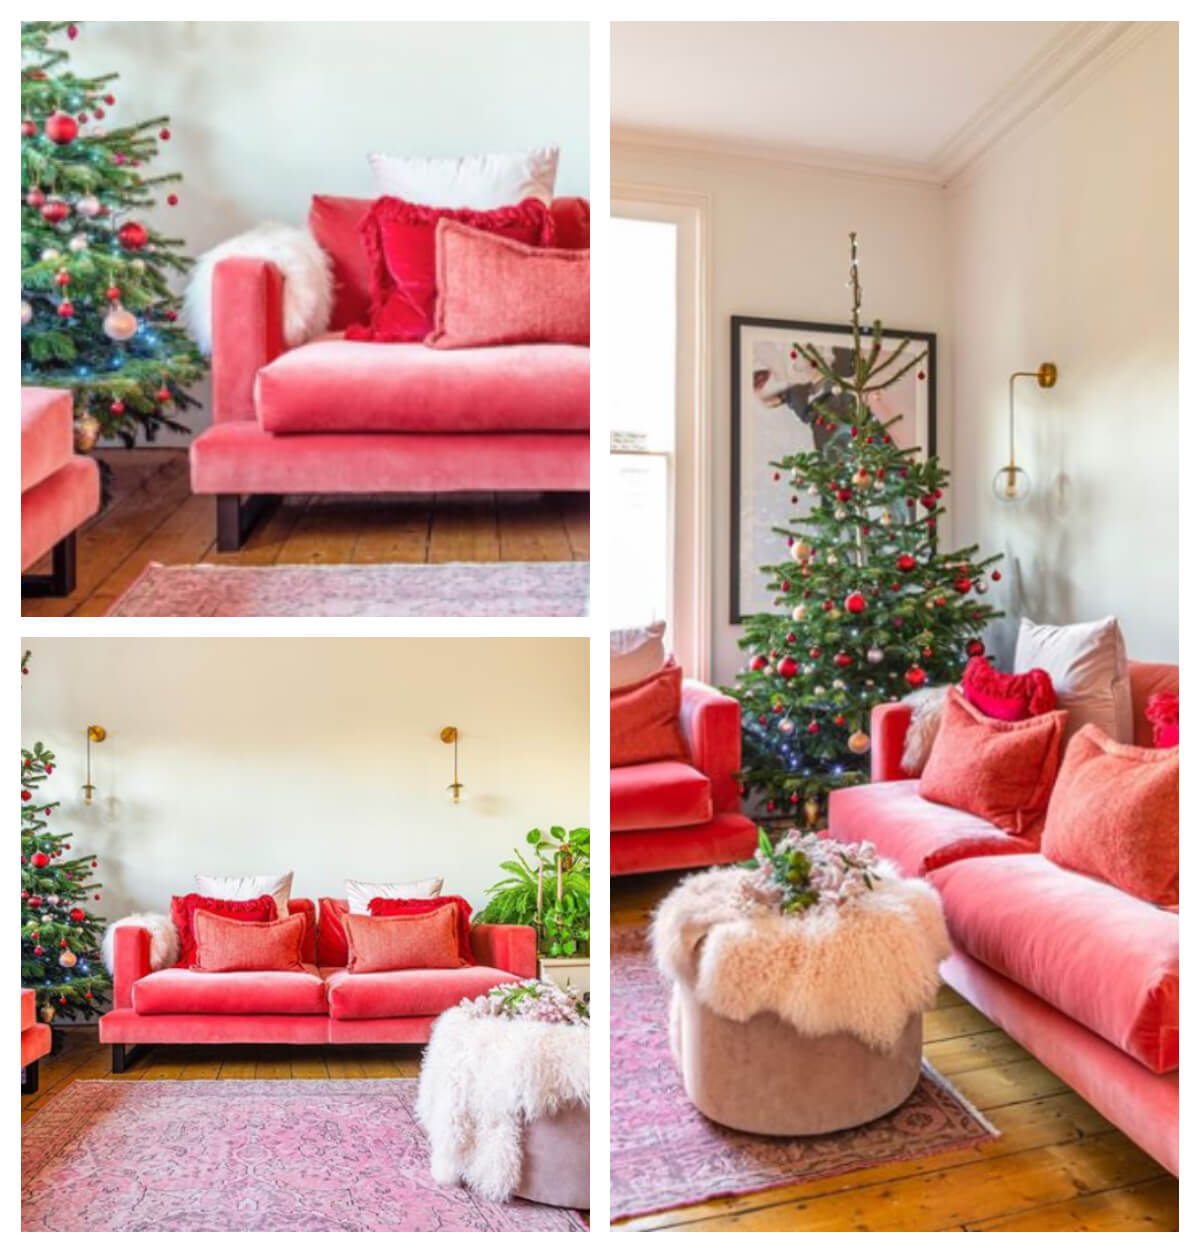 Christmas – as styled by you - website astiazh